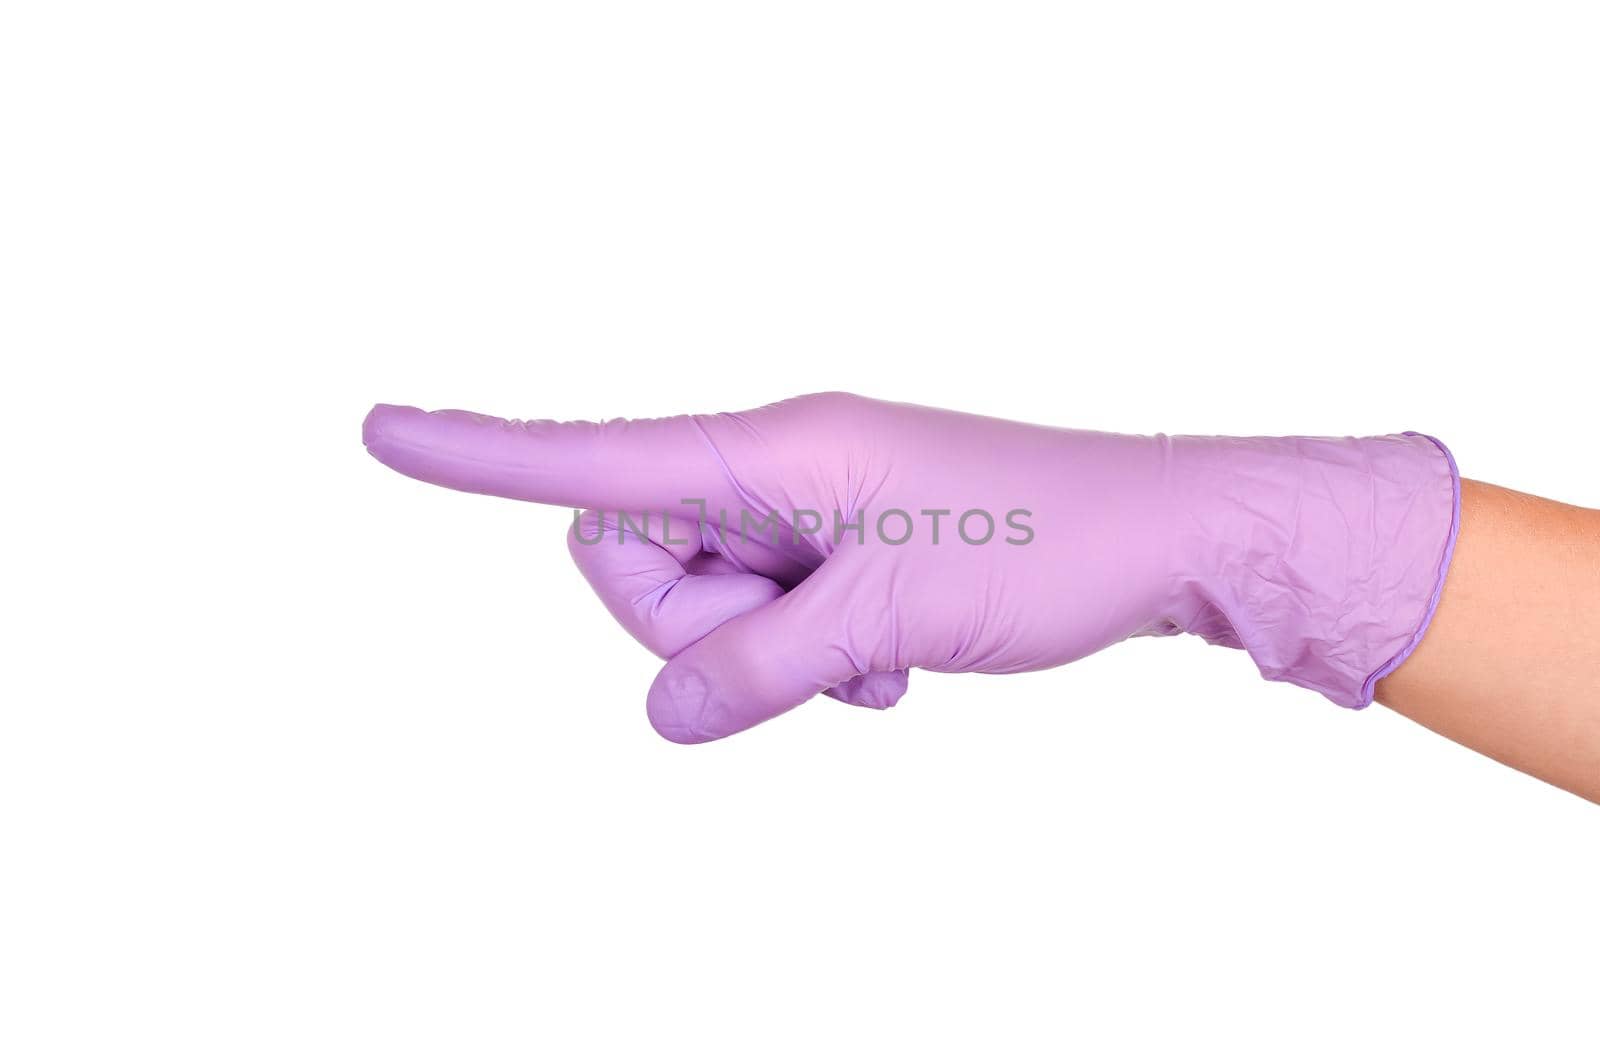 Hand pointing this way to follow. Hand in a purple latex glove isolated on white. Woman's hand gesture or sign isolated on white. Hand touching or pointing to something